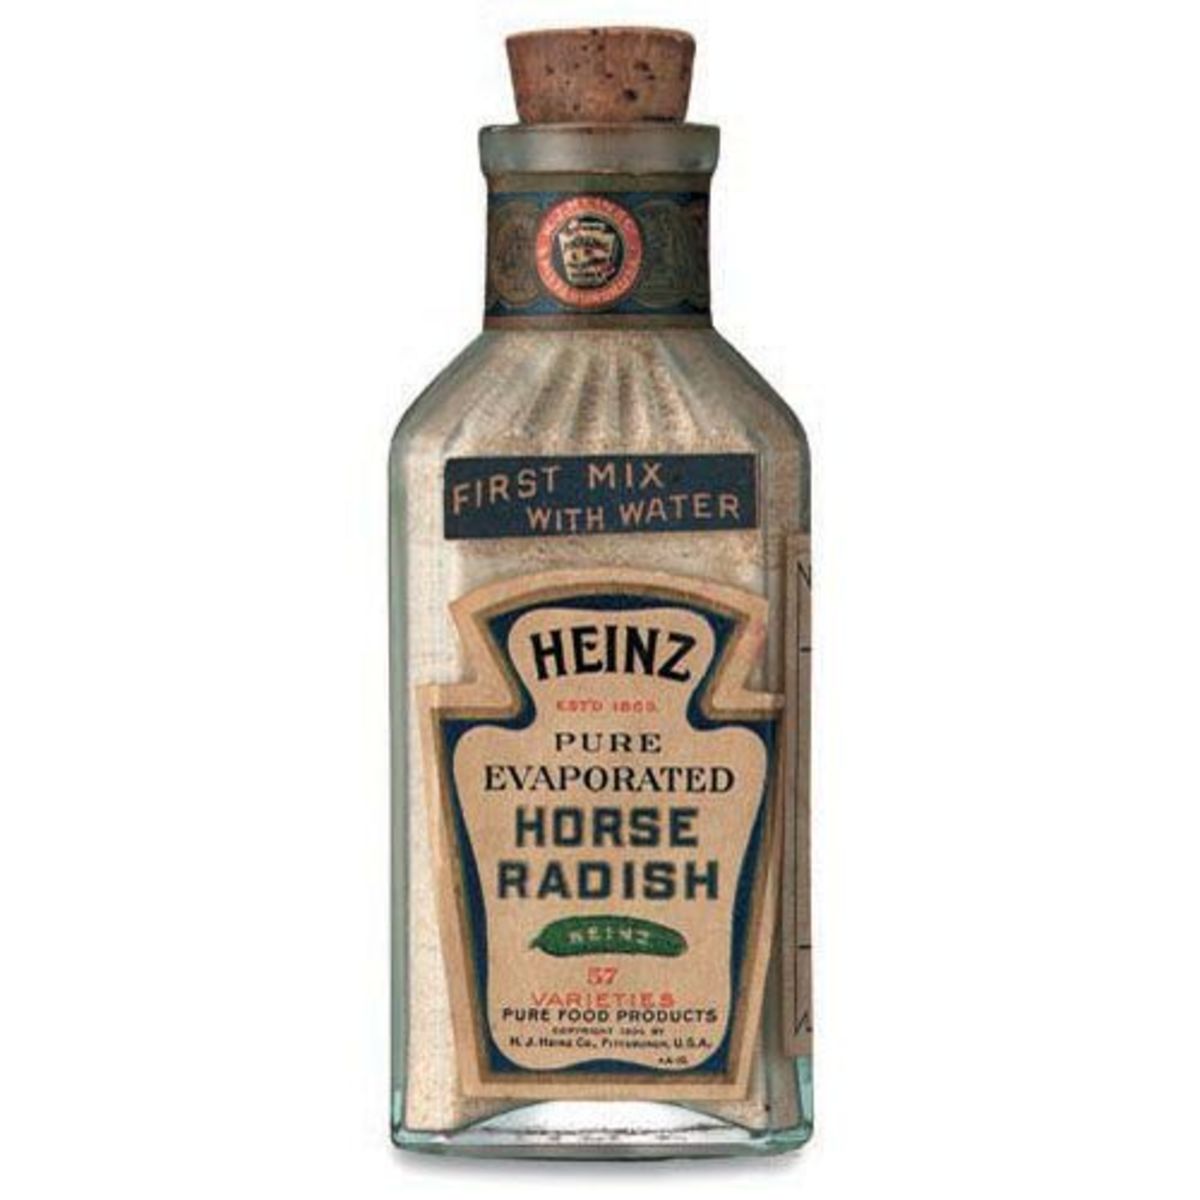 Henry J. Heinz-57 Varities: A Pioneer and a Man Ahead of His Time